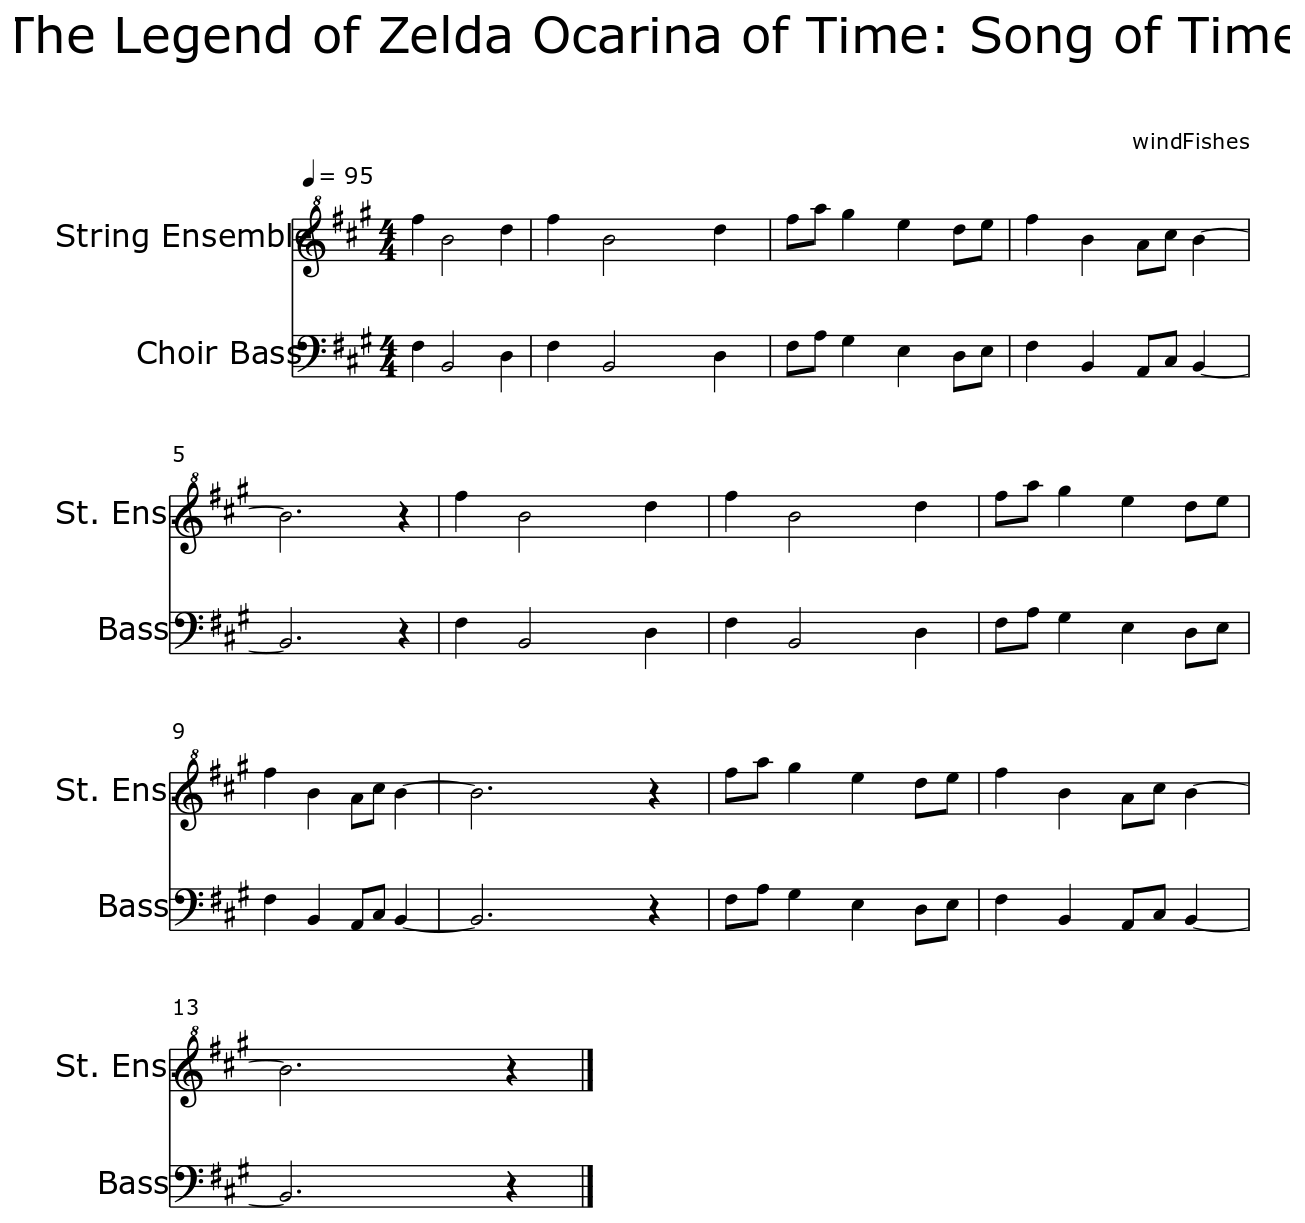 Song of Time on Ocarina 